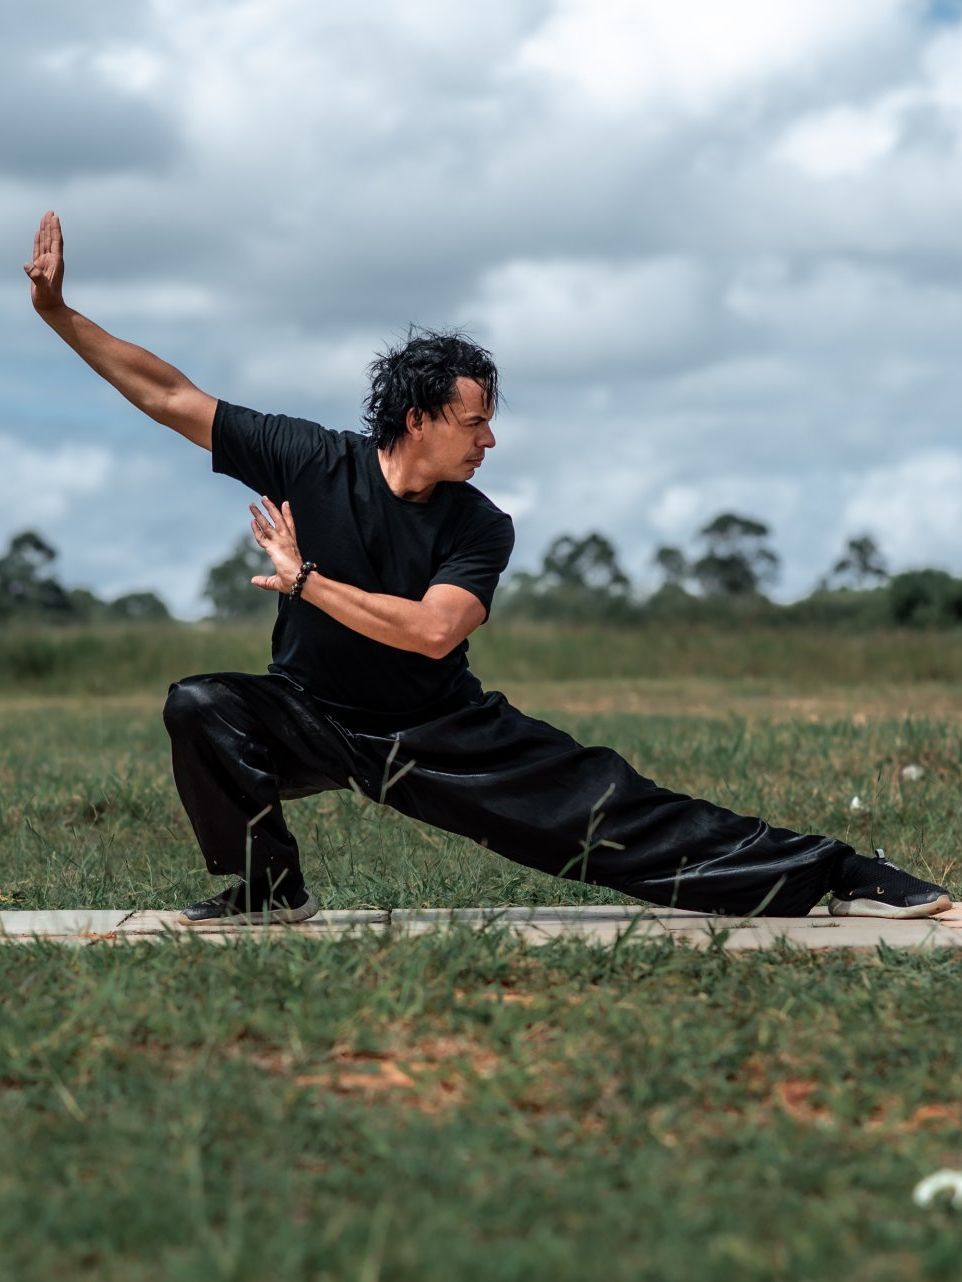 a man in a black shirt and black pants is practicing martial arts